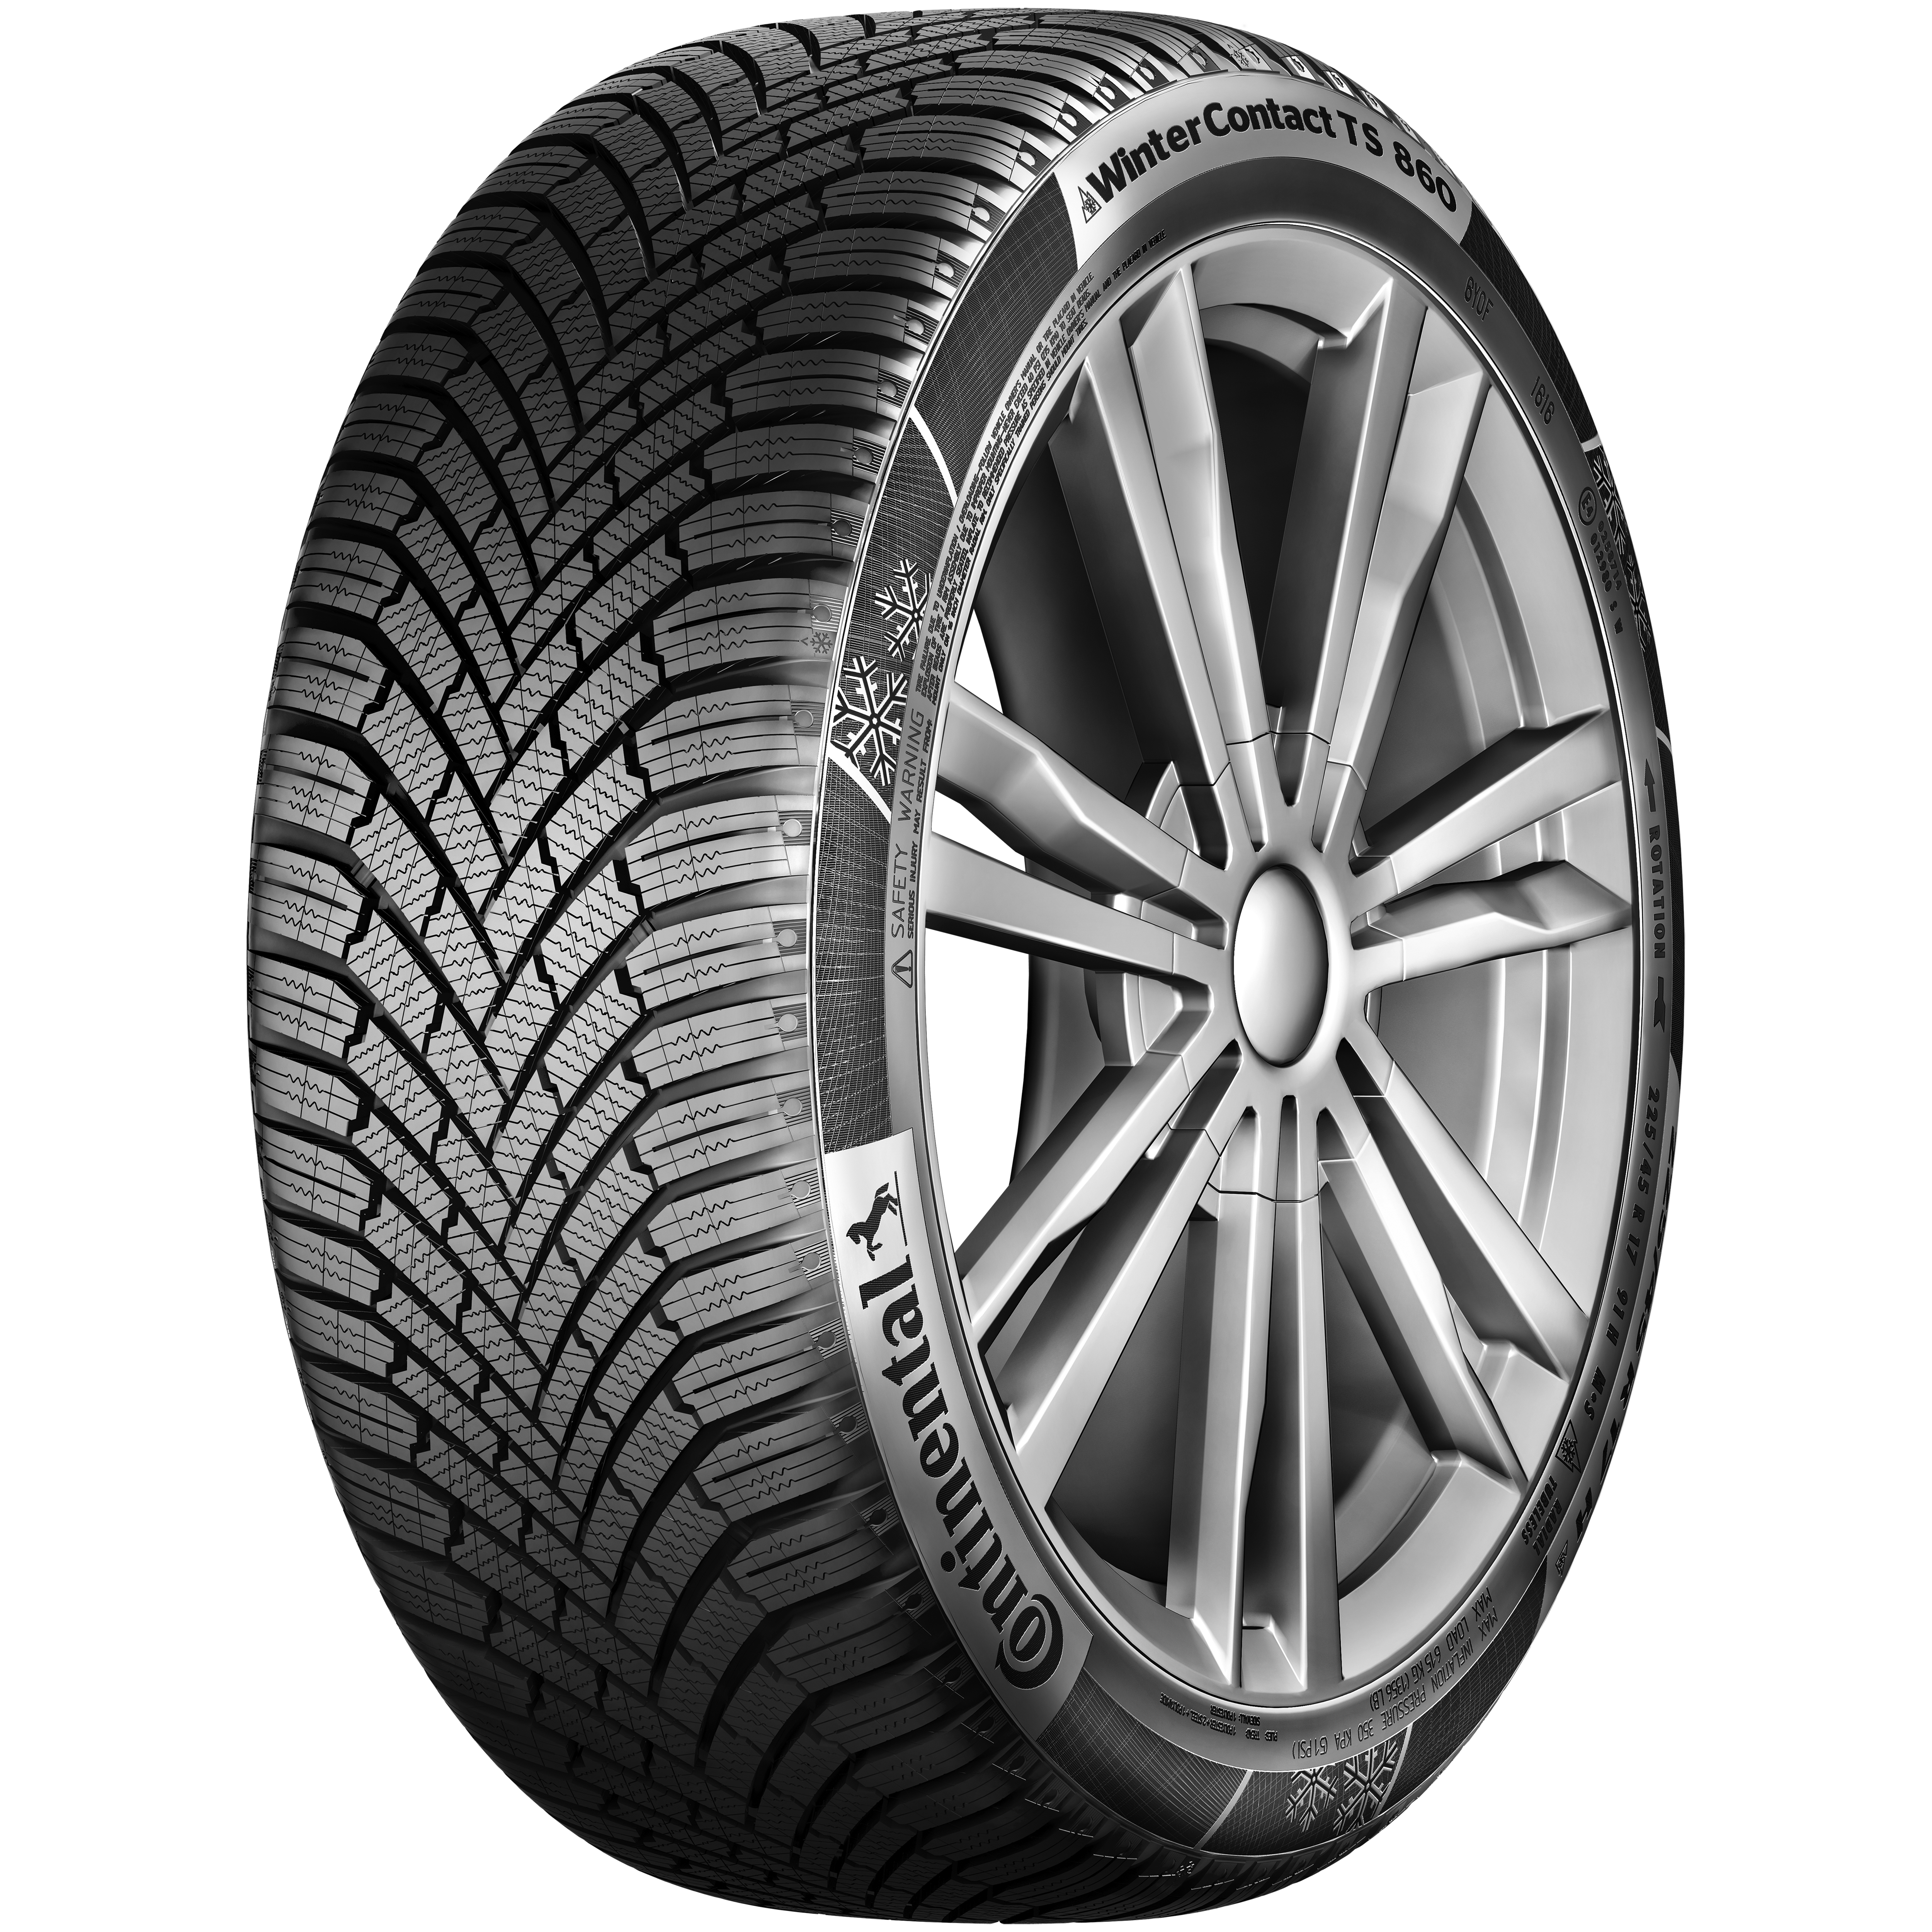 WinterContact TS 860: When you can\'t trust the winter, just trust your tires